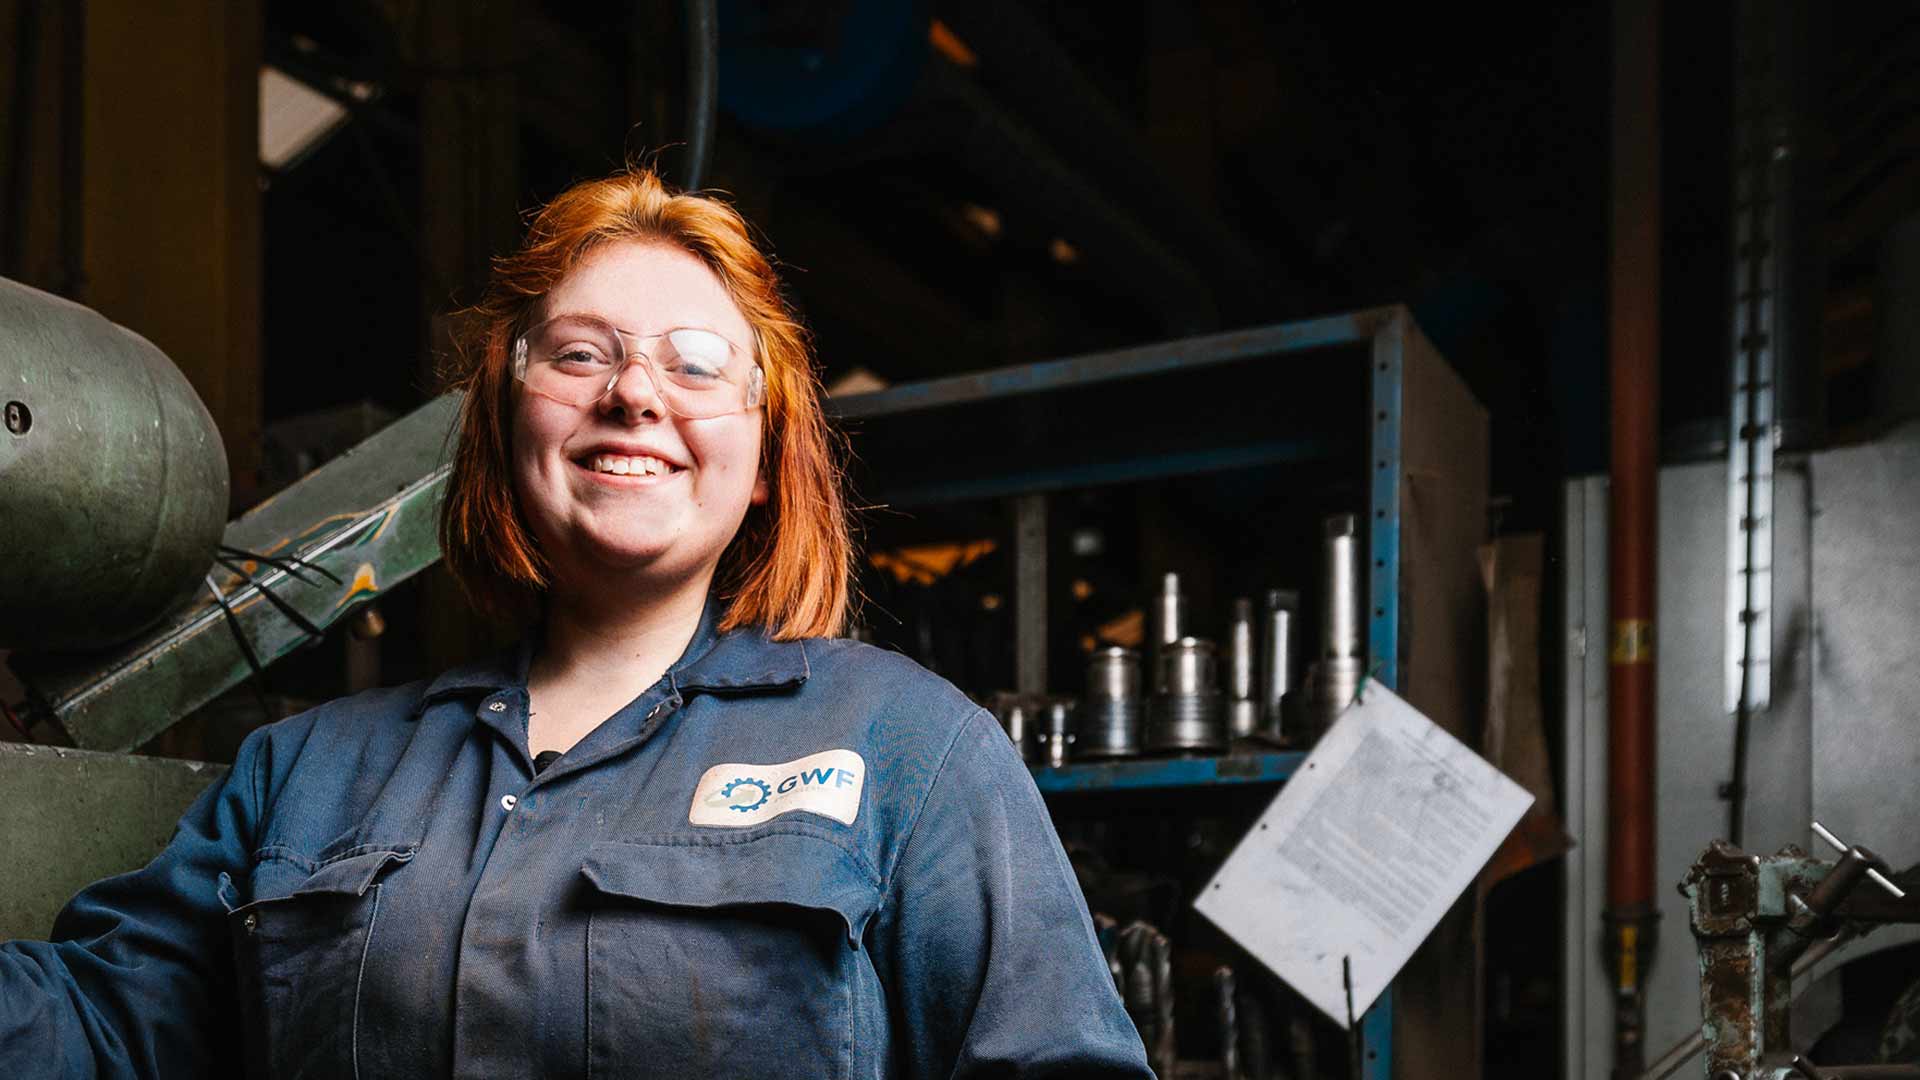 In an engineering working area, student Alisha smiles towards us, wearing safety glasses, gloves and overalls. Behind her a document on white paper is pinned to shelving which appears to contain spare equipment and tools